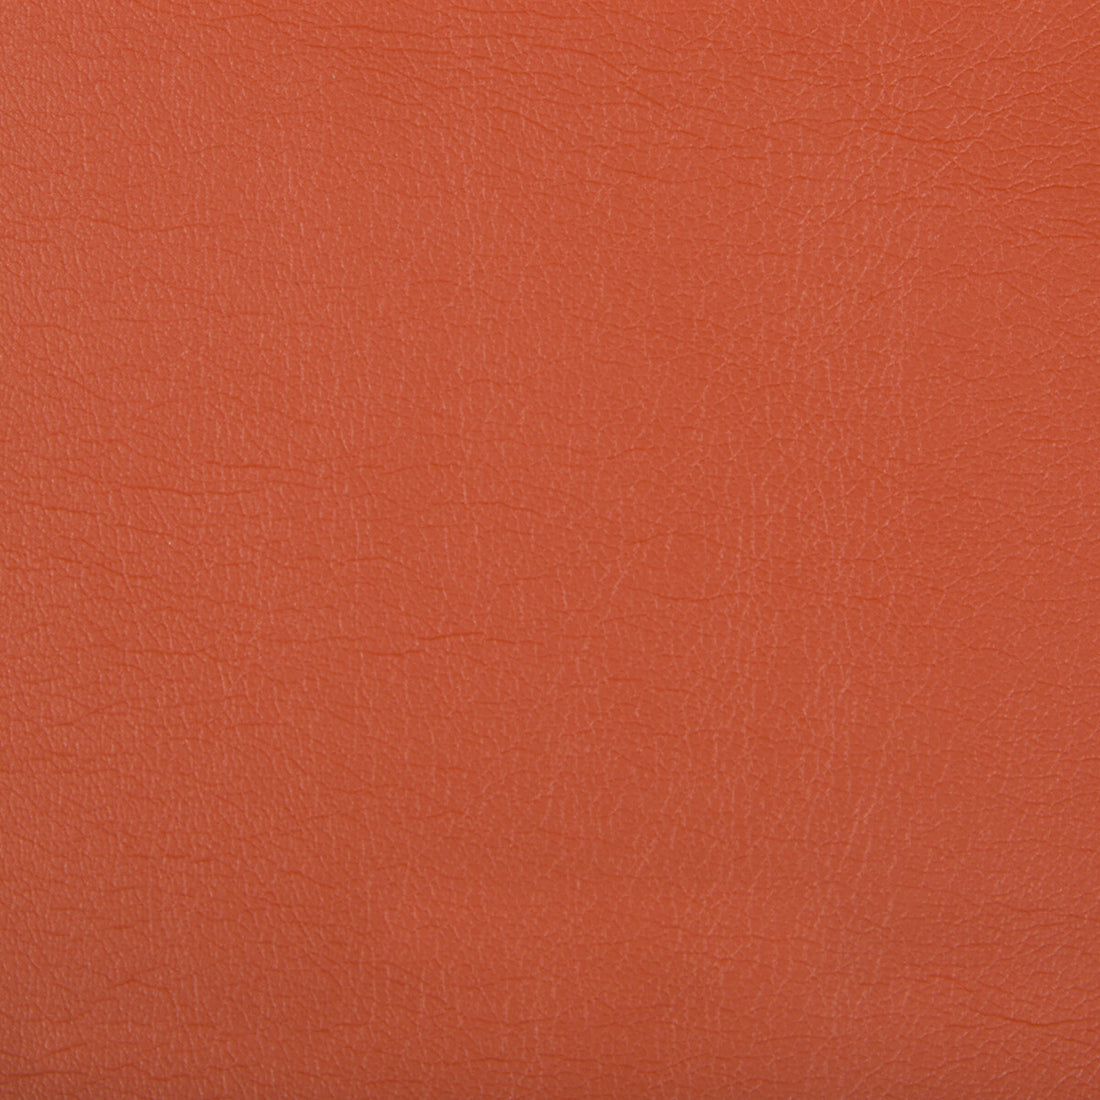 Optima fabric in nectarine color - pattern OPTIMA.12.0 - by Kravet Contract